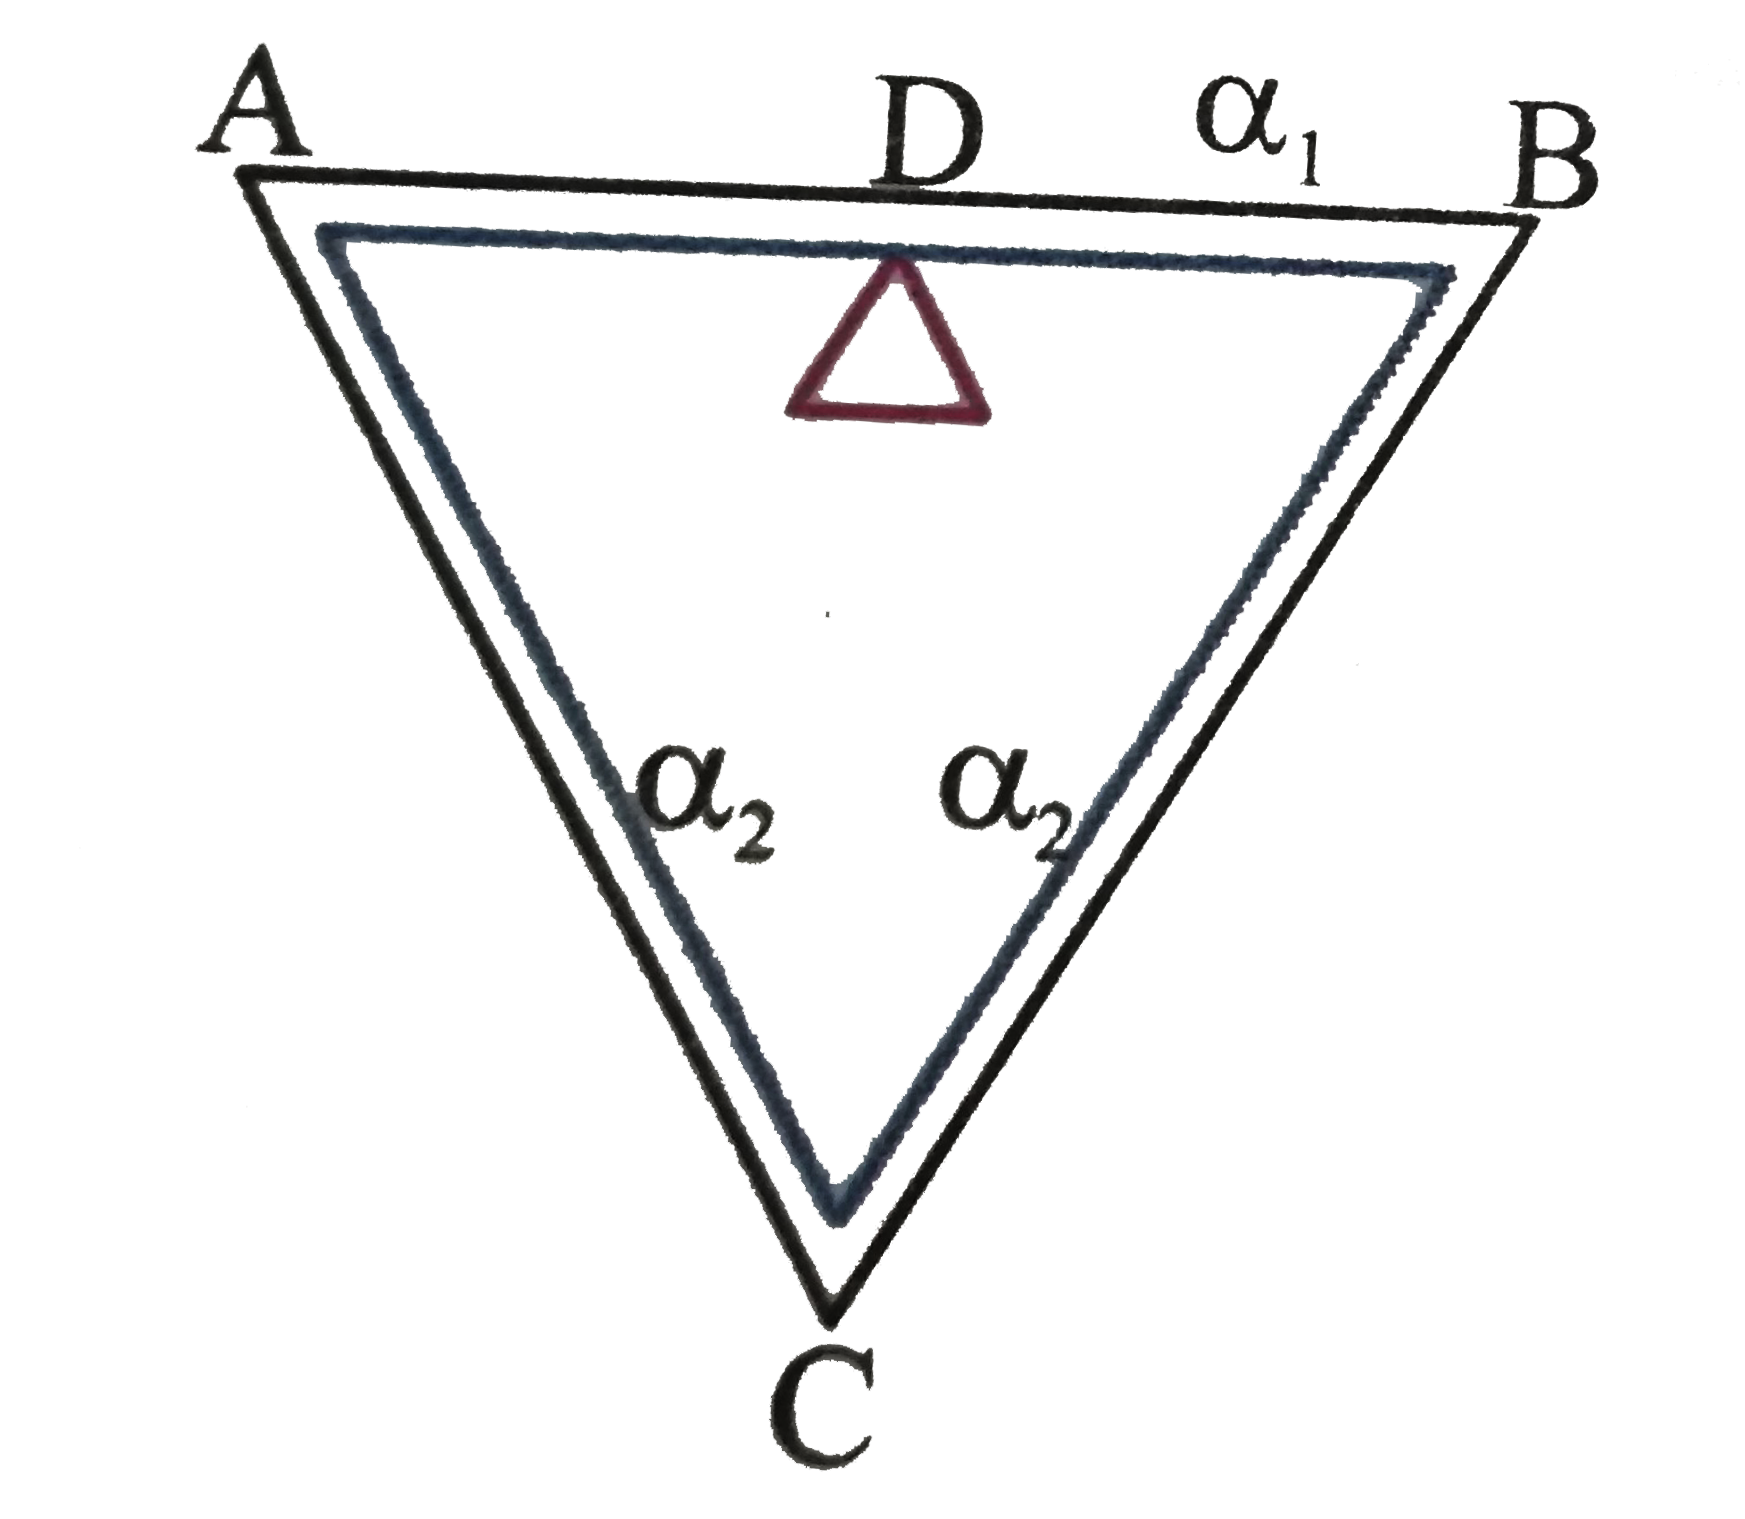 An equilateral triangle ABC is formed by joining three rods of equal length and D is the mid-point of AB. The coefficient of linear expansion for AB is alpha(1) and for AC and BC is alpha(2). The relation between alpha(1) and alpha(2), if distance DC remains constant for small changes in temperature is